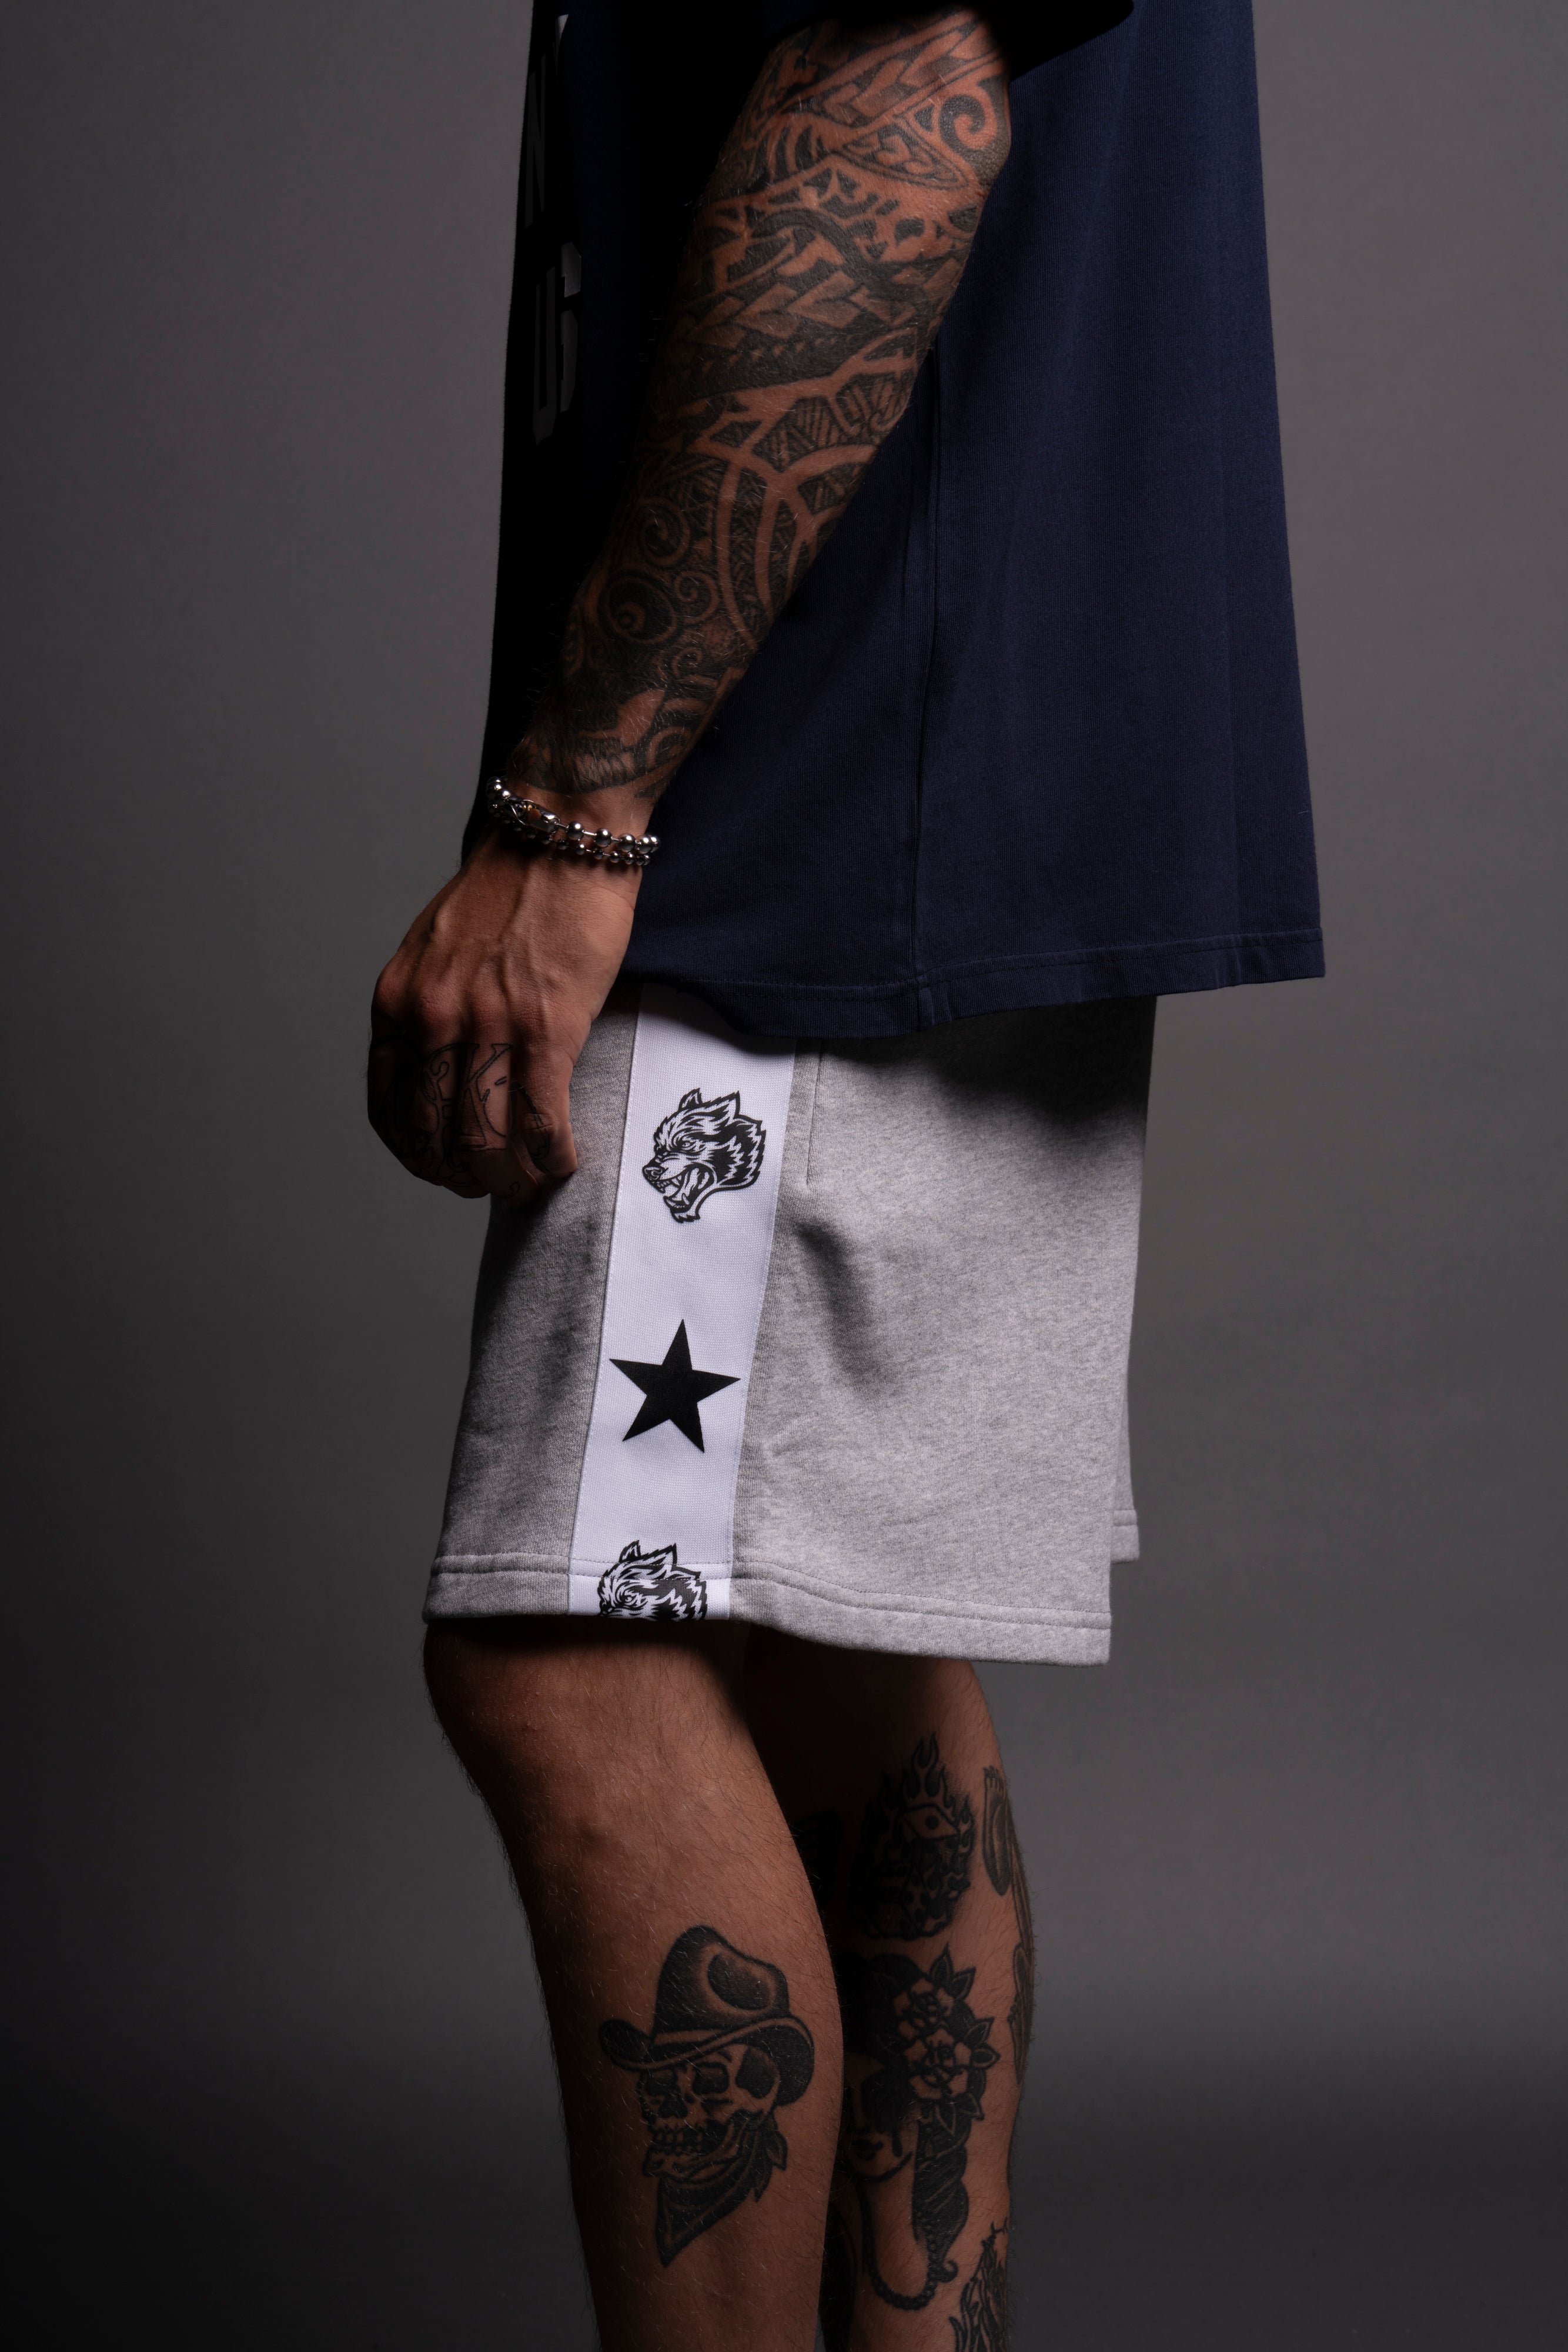 Wolves Roadster Sweat Shorts in Light Athletic Gray